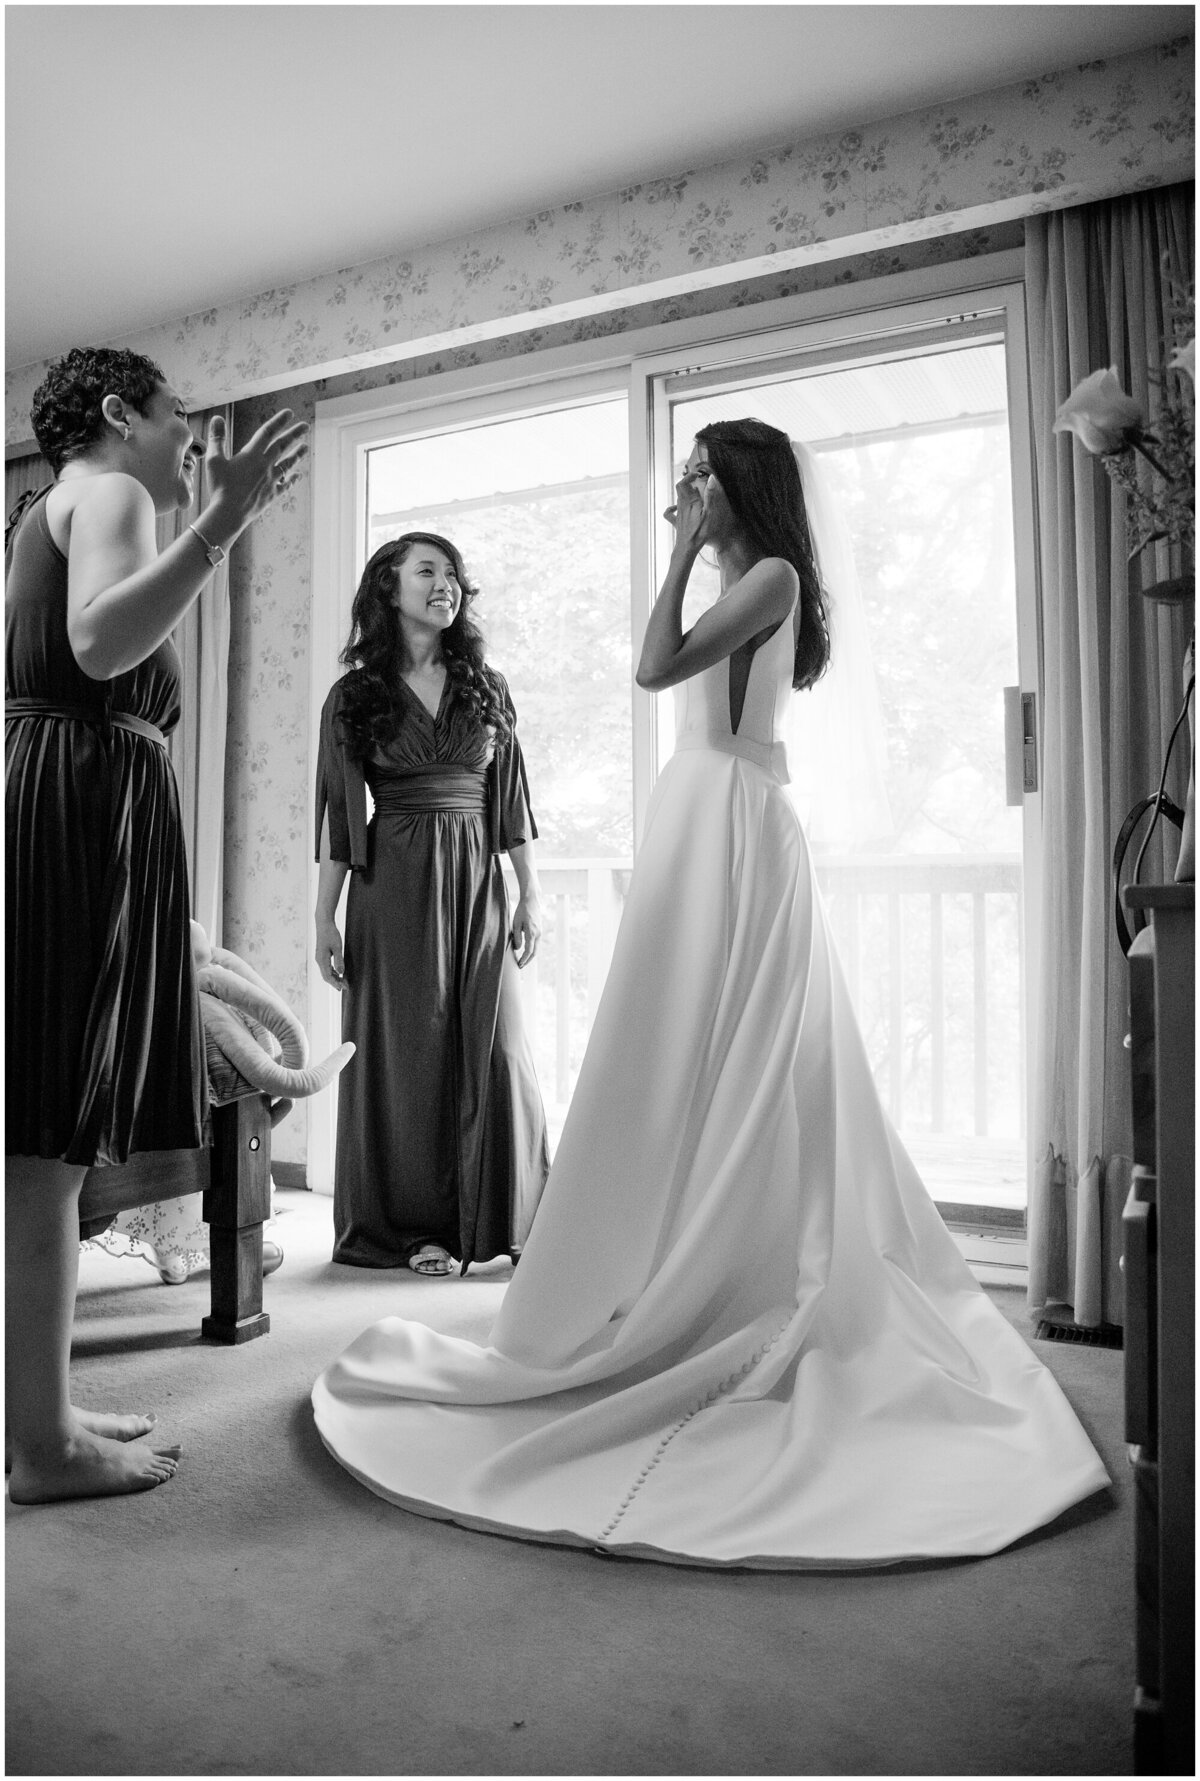 Bride and bridesmaids getting ready - The brides wears a custom and modern wedding dress with a veil